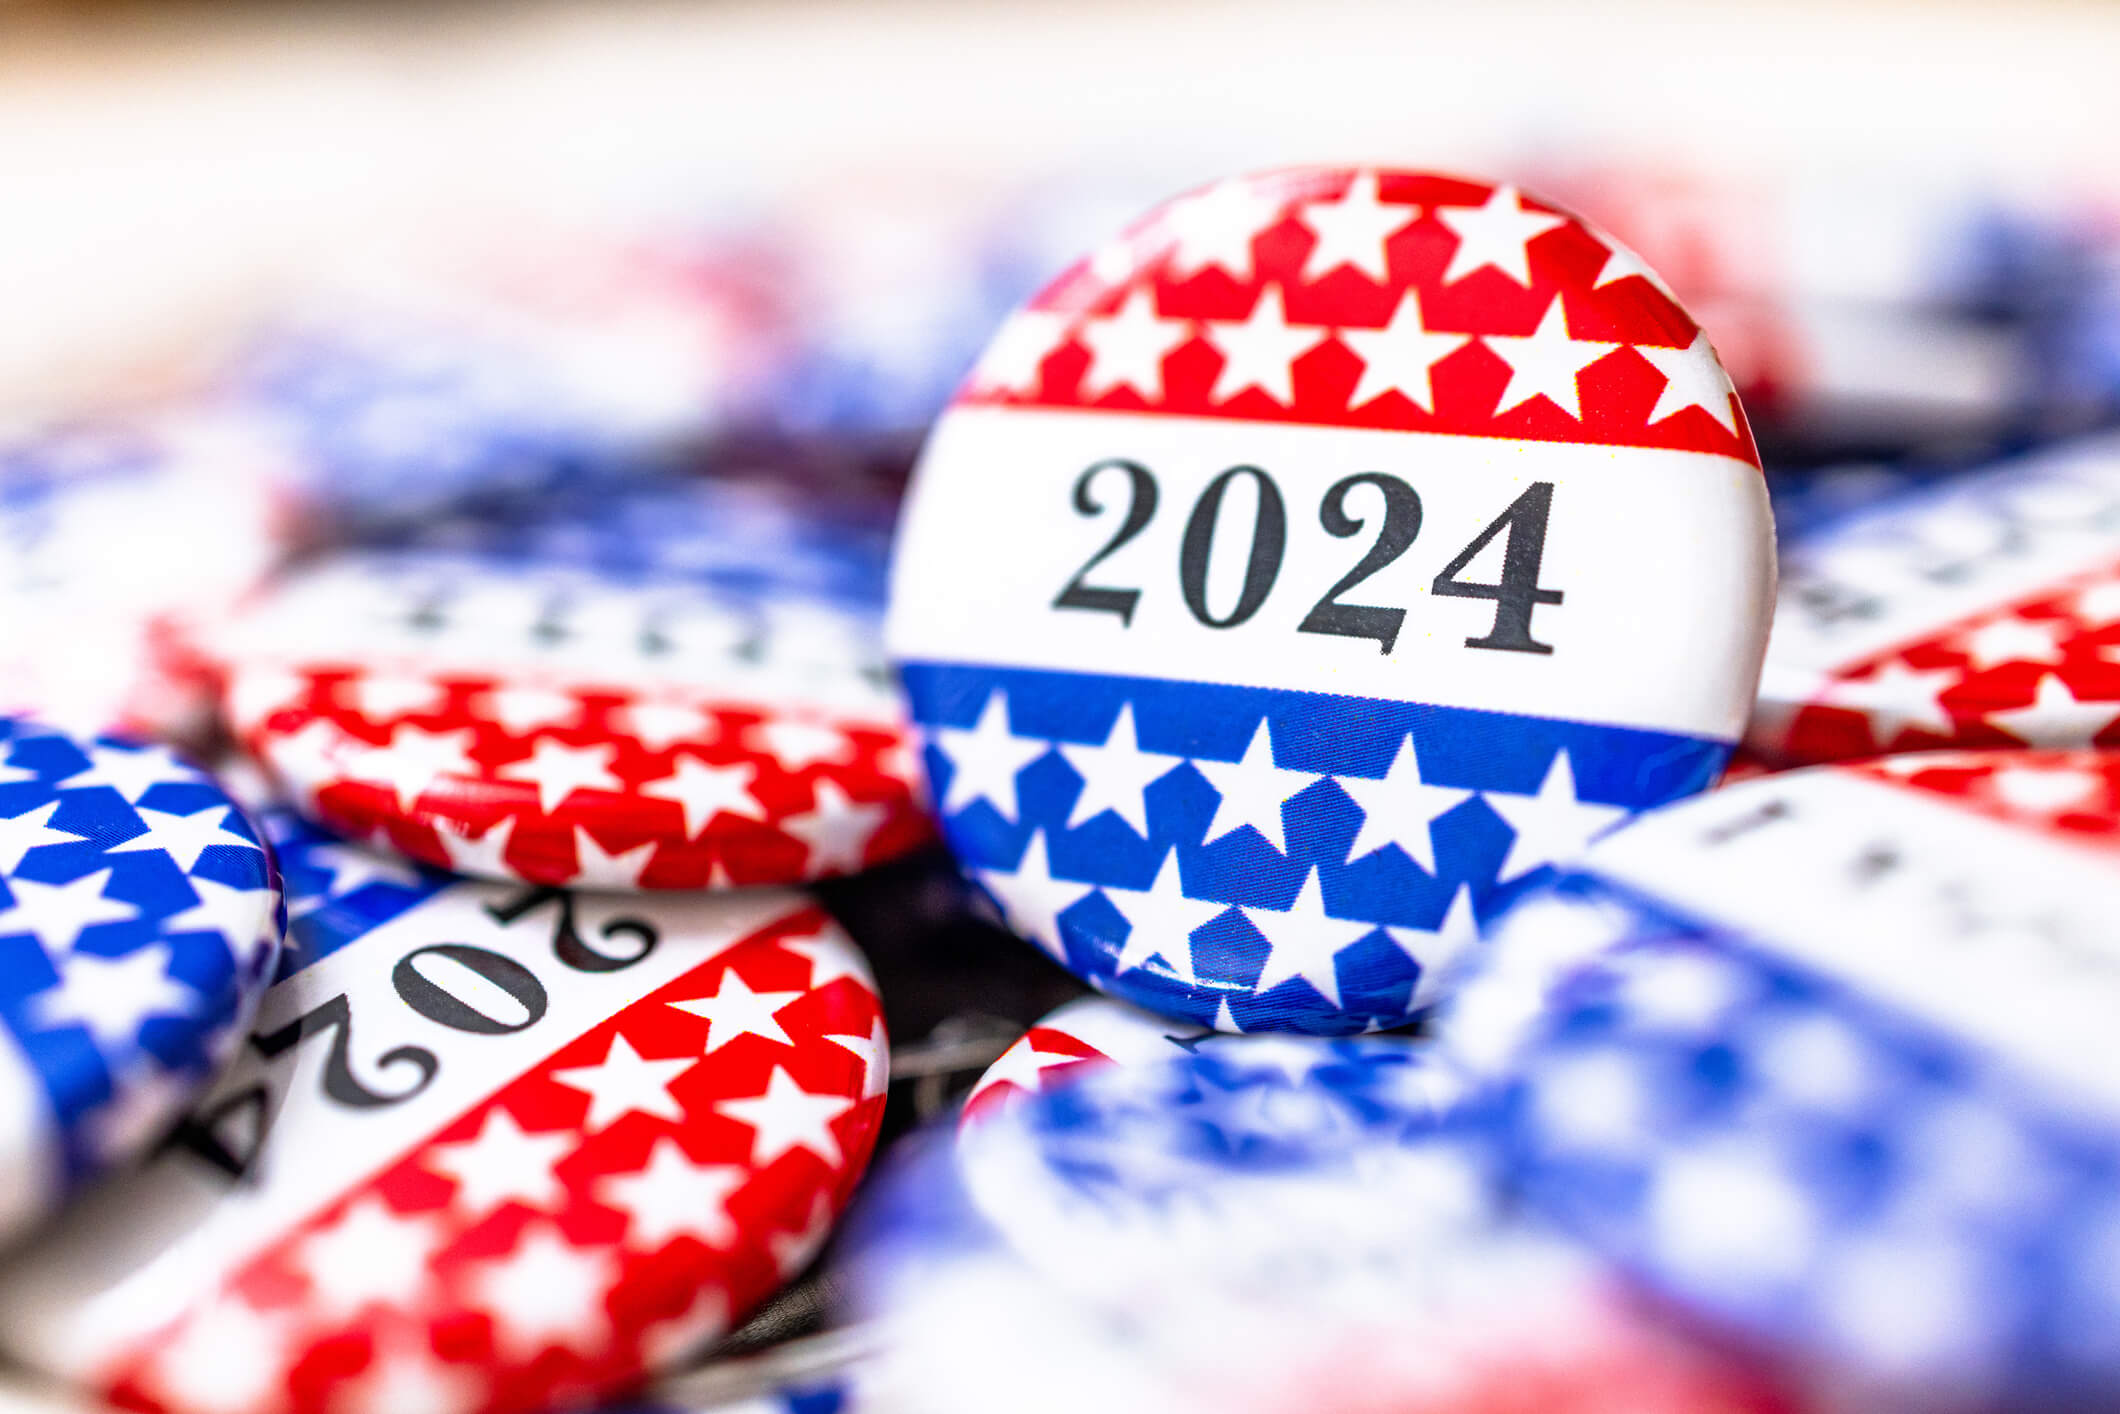 Closeup of election vote button with text that says 2024